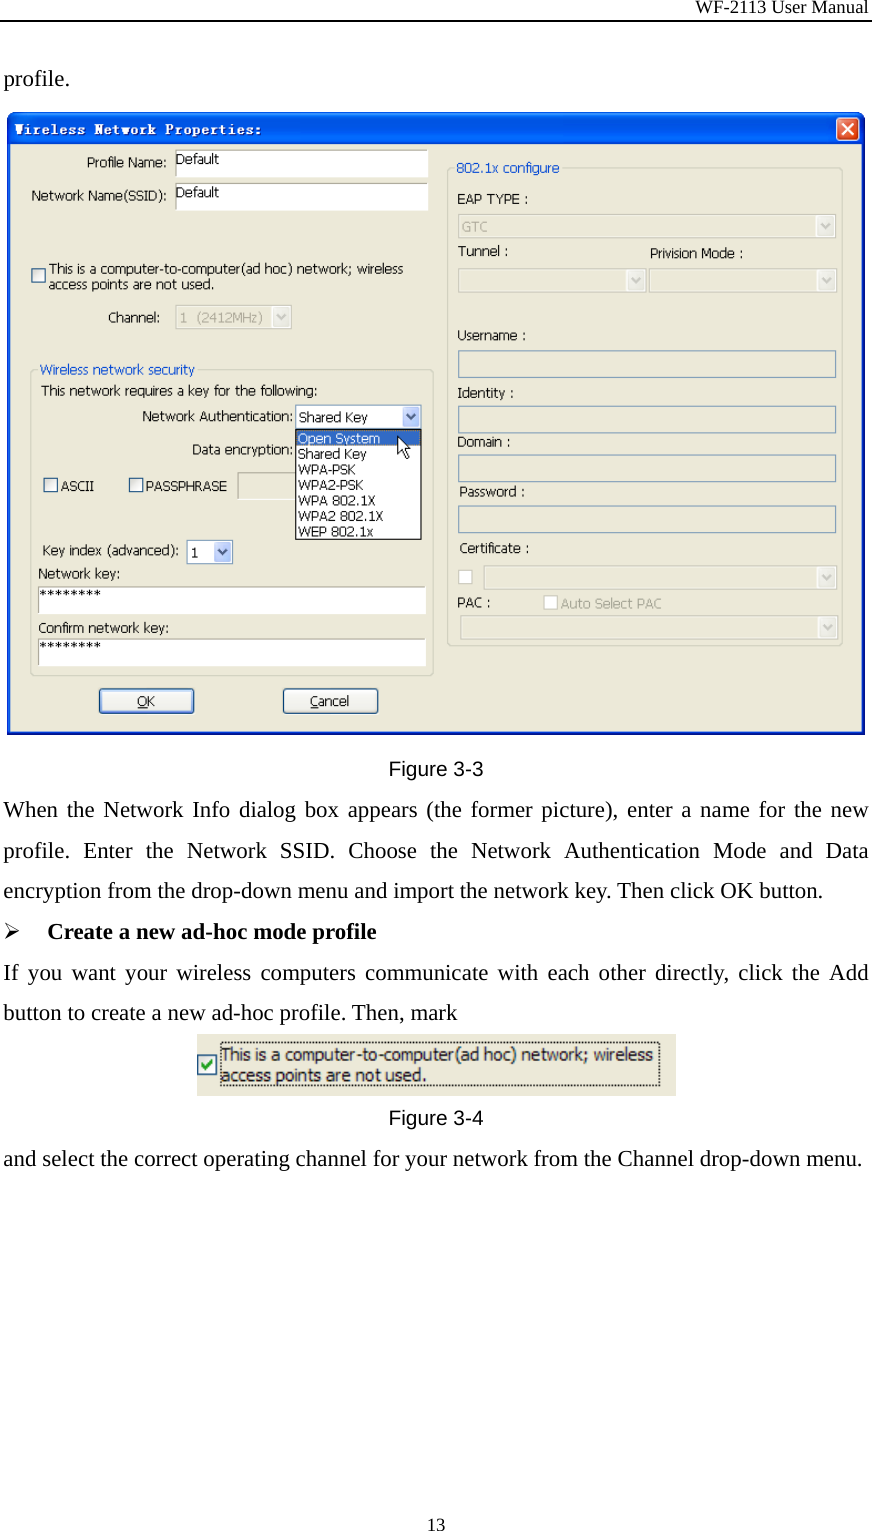 WF-2113 User Manual 13 profile. Figure 3-3 When the Network Info dialog box appears (the former picture), enter a name for the new profile. Enter the Network SSID. Choose the Network Authentication Mode and Data encryption from the drop-down menu and import the network key. Then click OK button.   ¾ Create a new ad-hoc mode profile If you want your wireless computers communicate with each other directly, click the Add button to create a new ad-hoc profile. Then, mark Figure 3-4 and select the correct operating channel for your network from the Channel drop-down menu. 